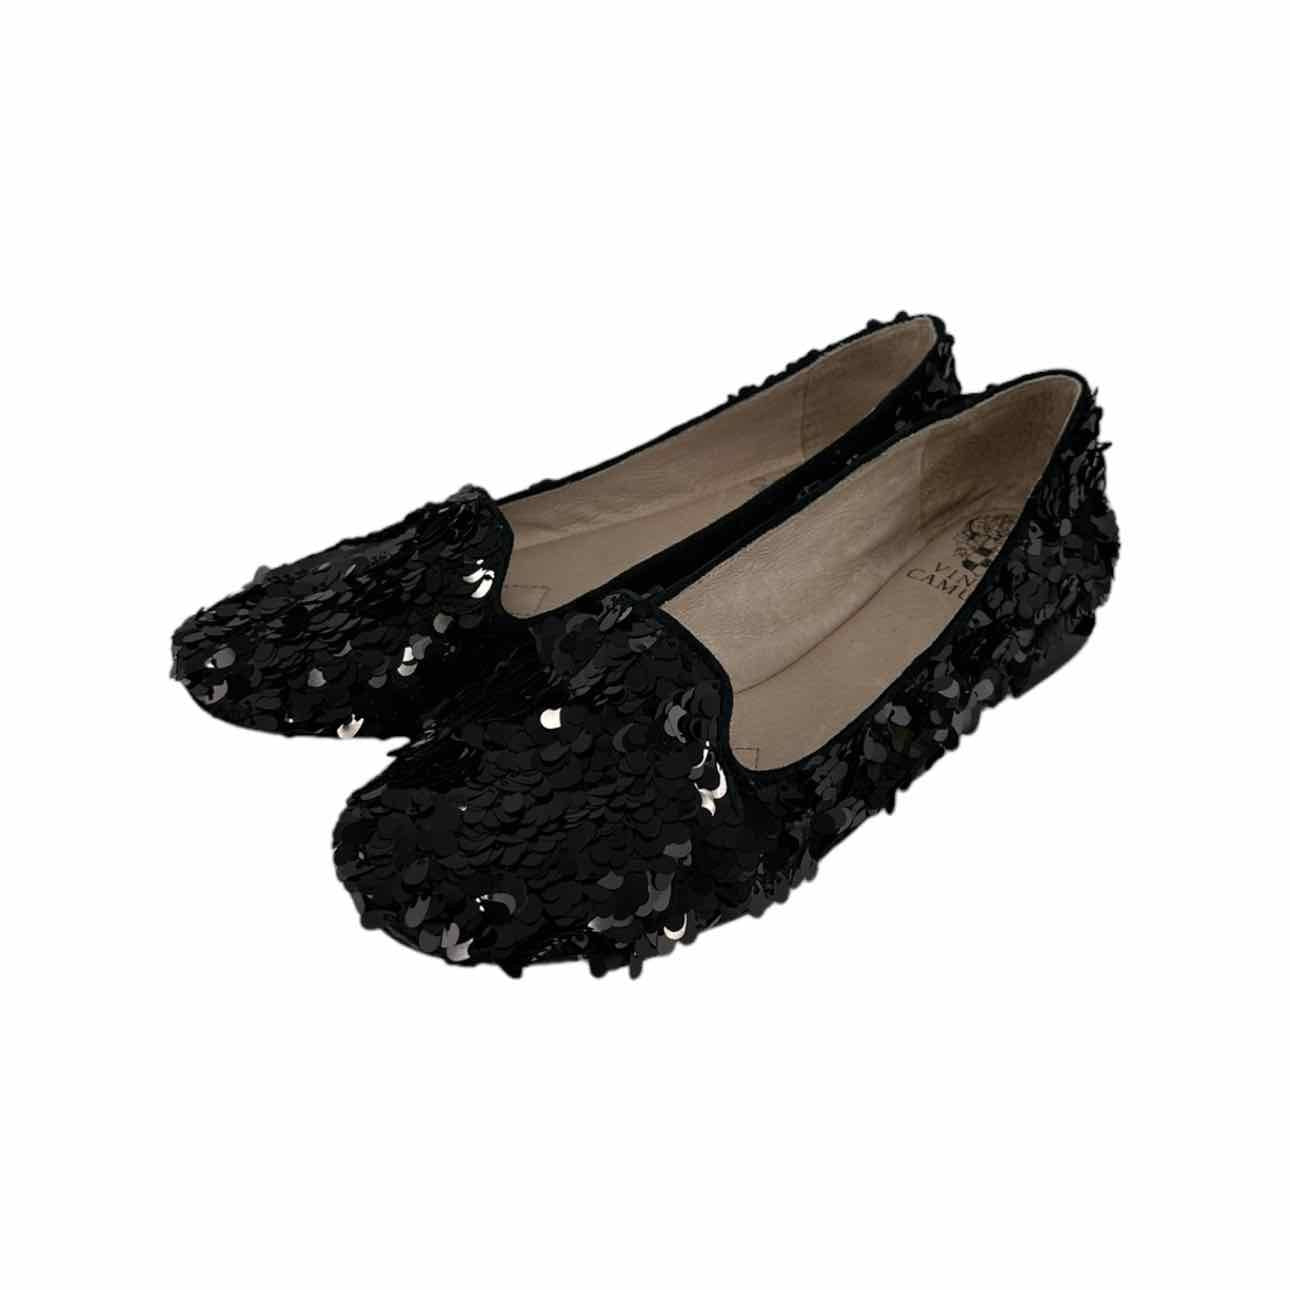 VINCE CAMUTO Black Sequined LORIA Flats Size 7.5